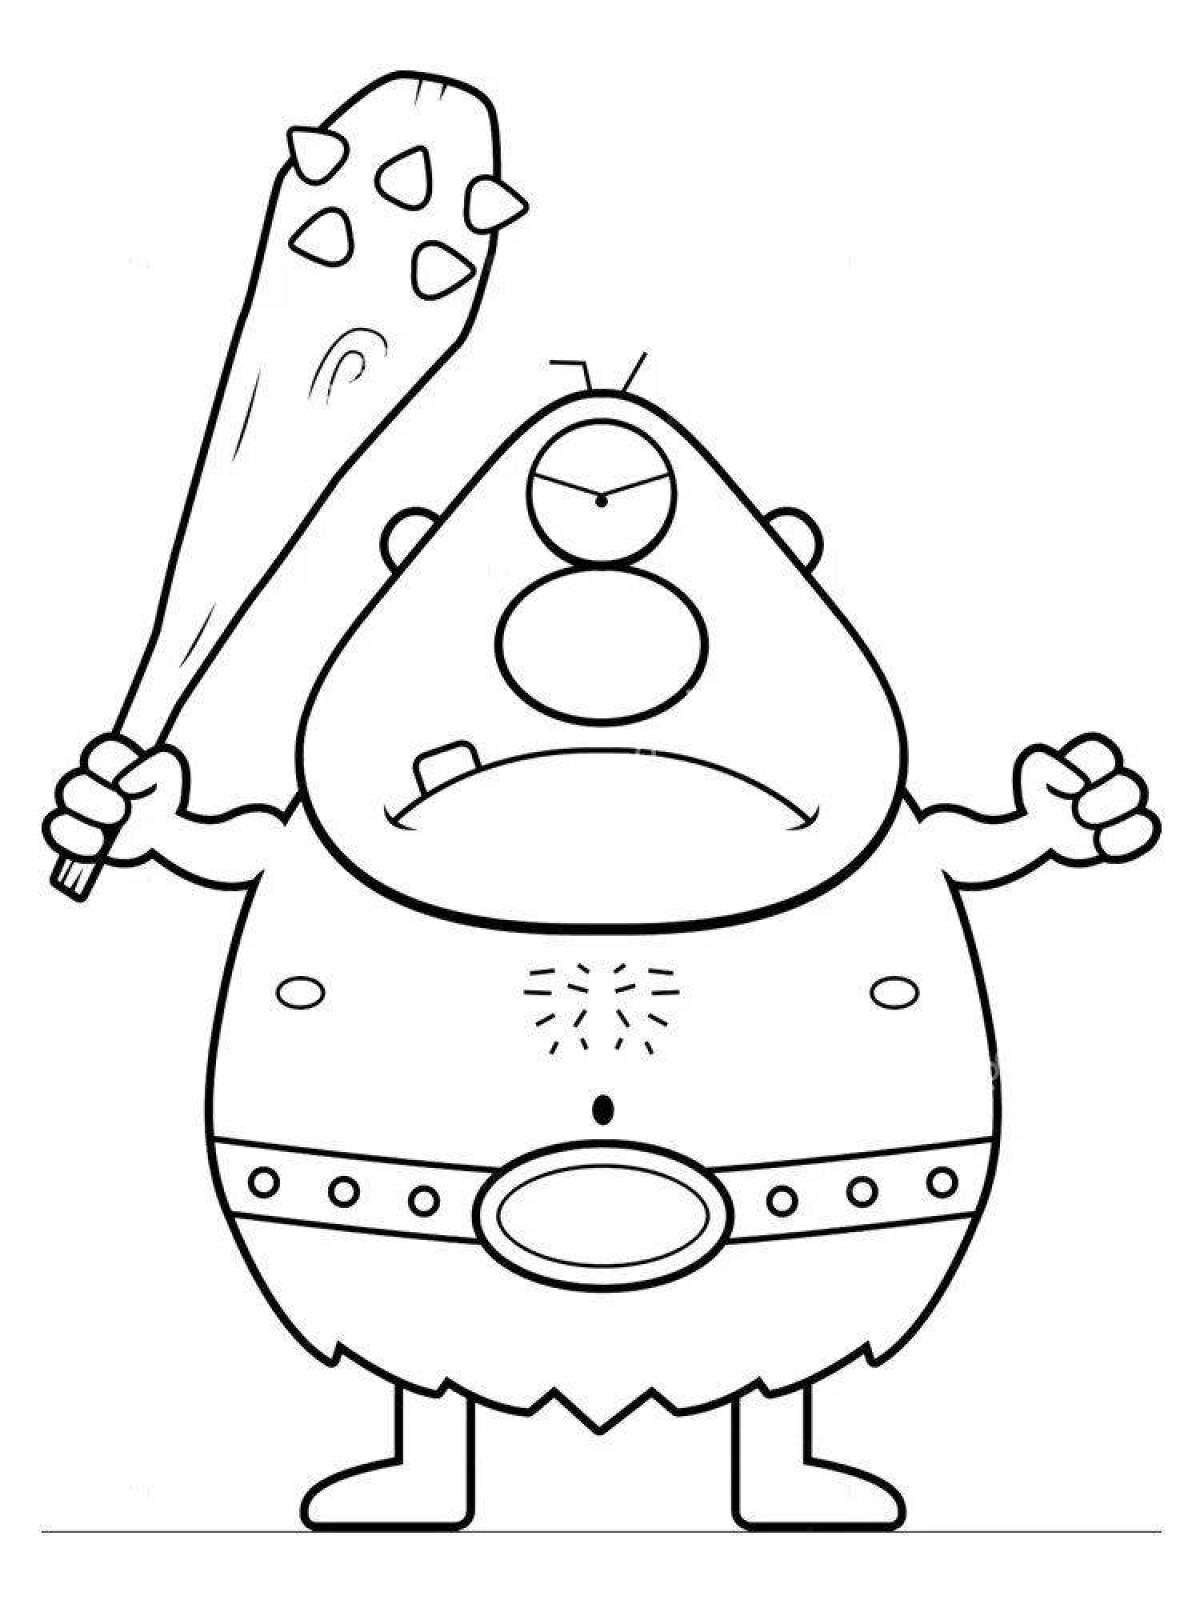 Cyclops freaky coloring page